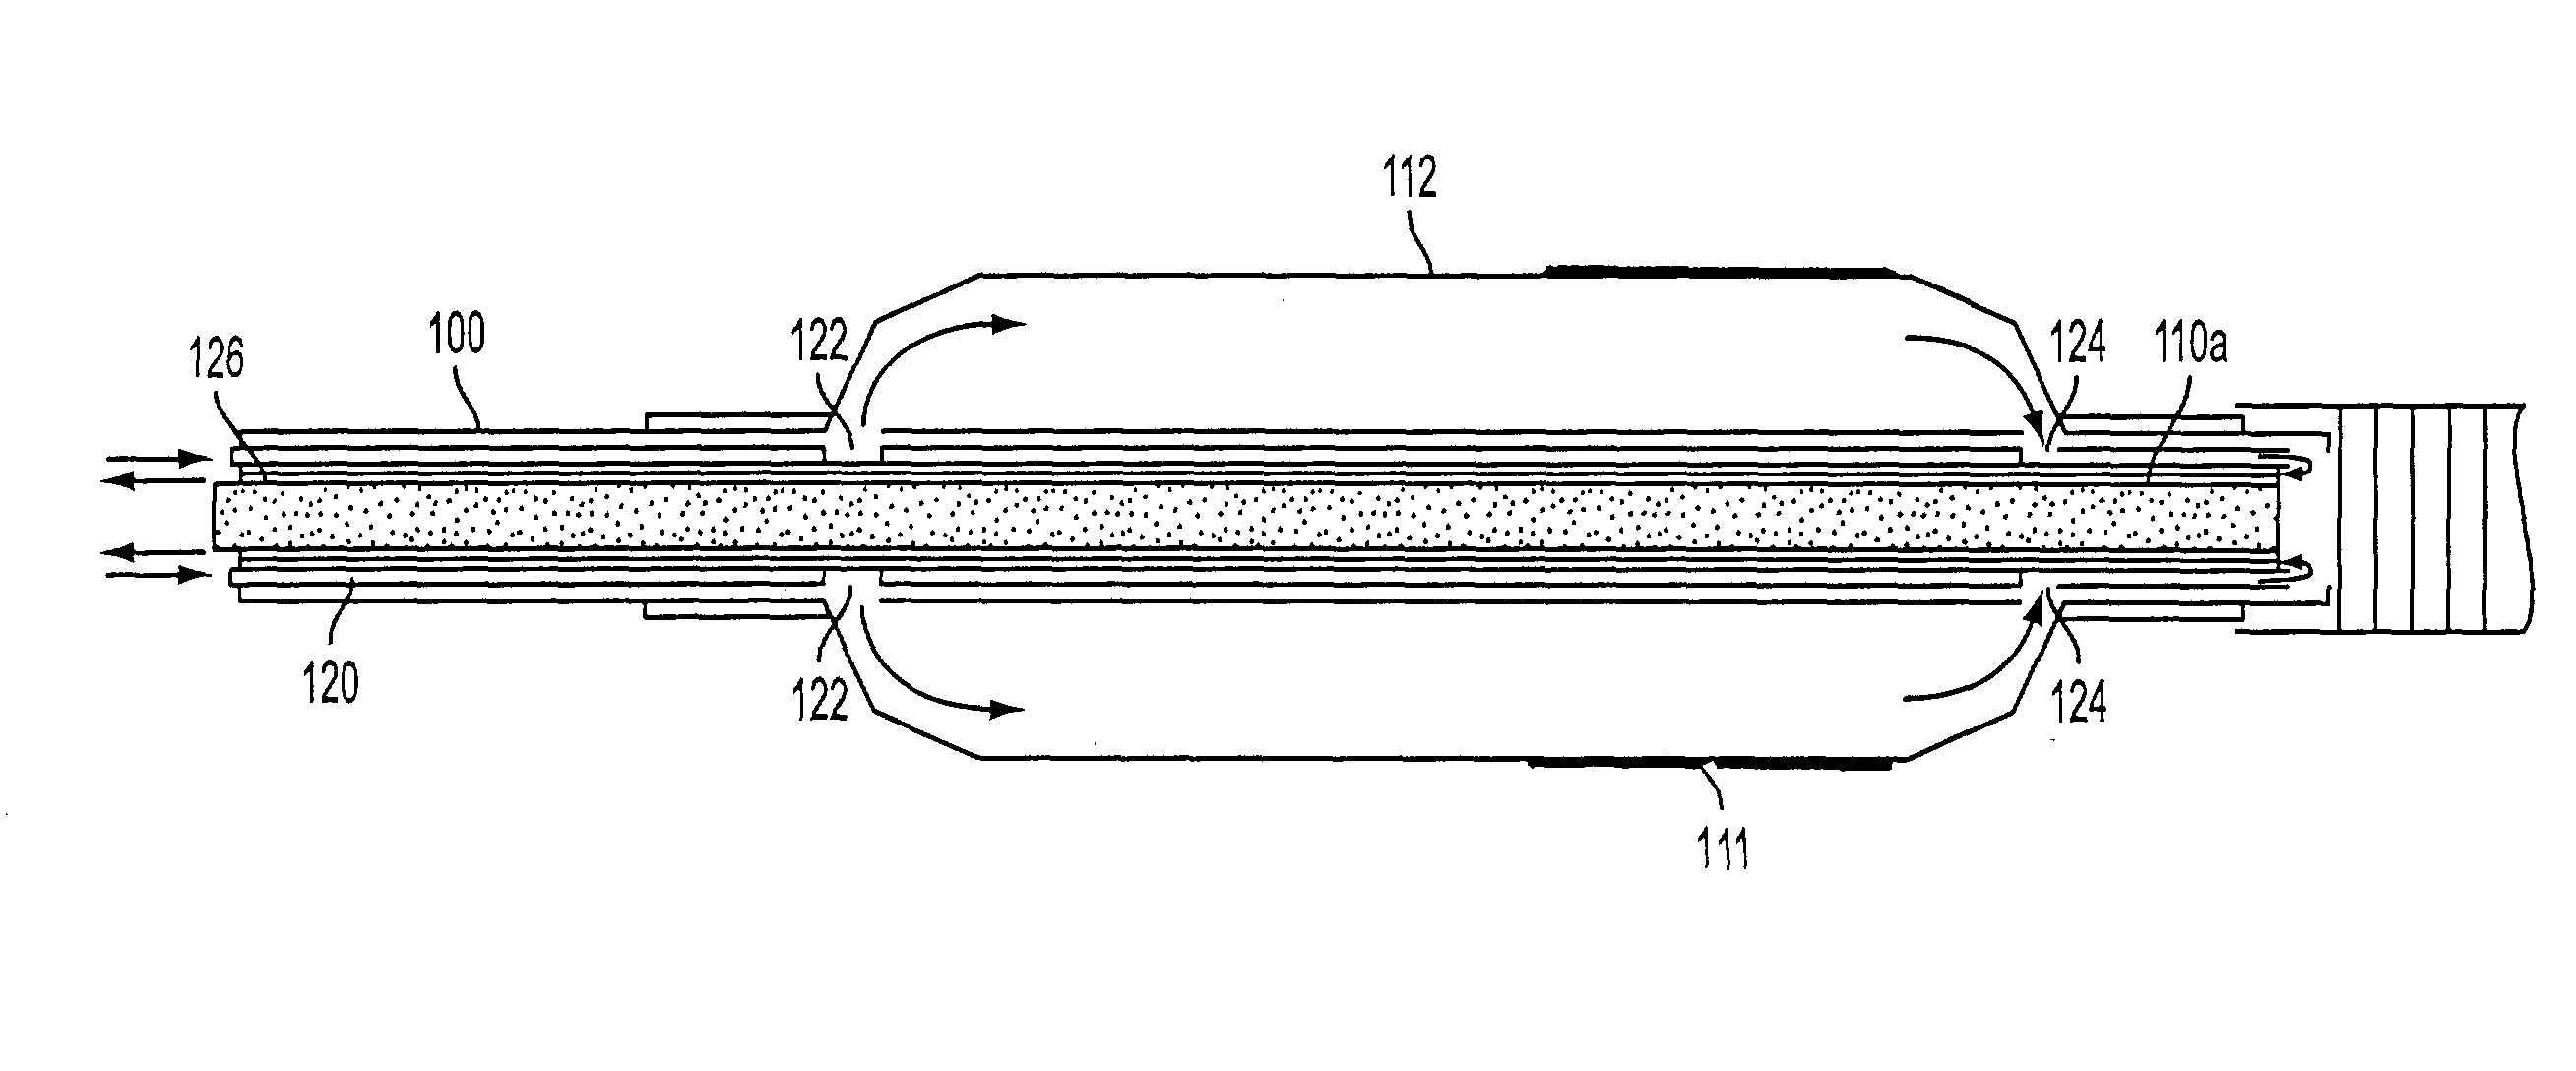 Apparatus for treatment of tissue adjacent a bodily conduit with a gene or drug-coated compression balloon